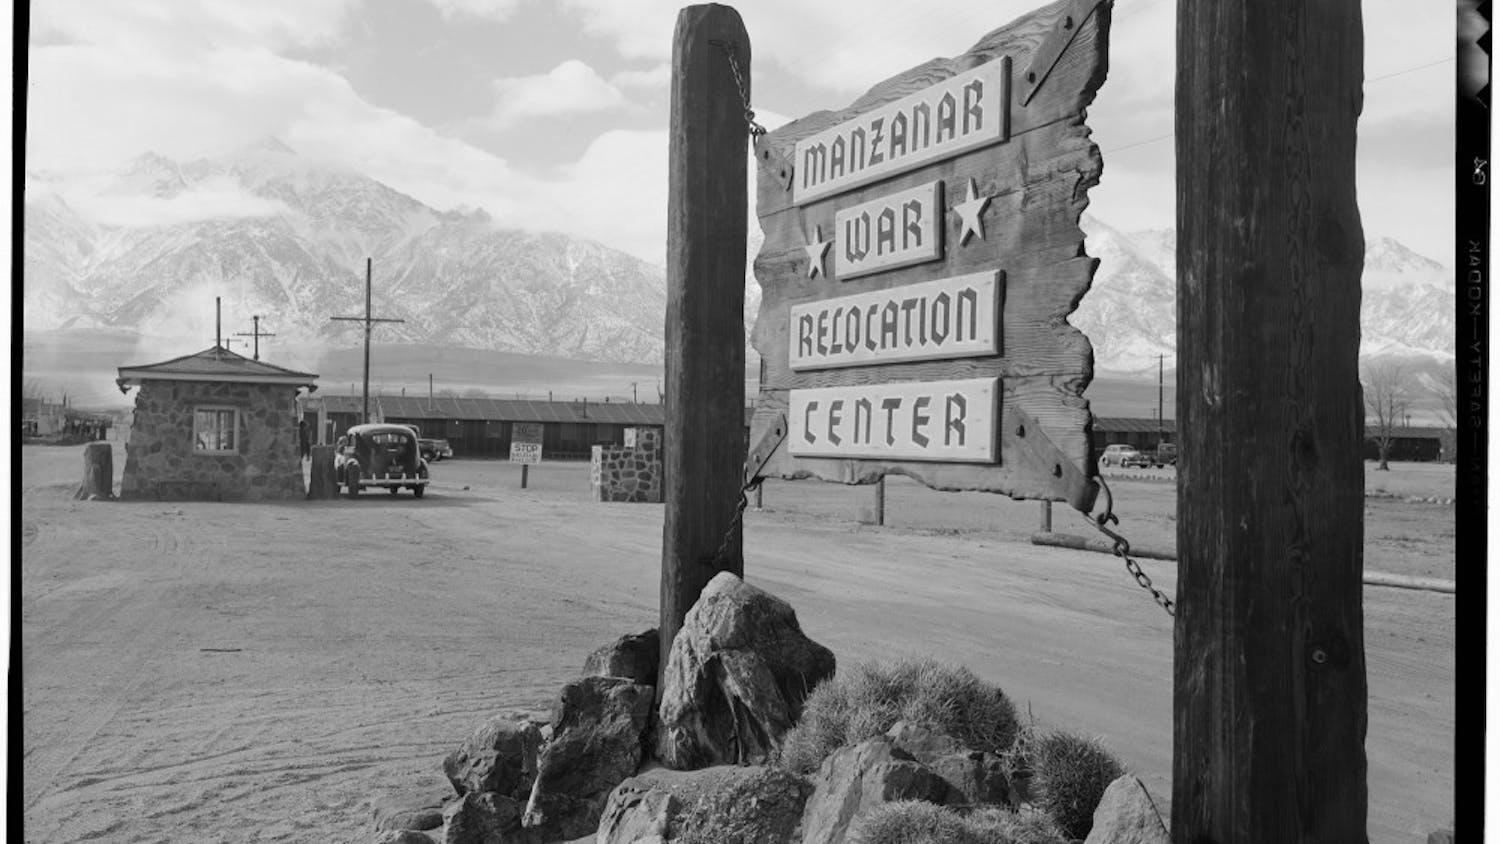 This is the entrance to Manzanar Relocation Center in California in 1943, where 110,000 Japanese Americans were detained. The Monroe County Public Library screened four short films about Japanese internment during World War II on Saturday to preface its upcoming "Power of Words" event.